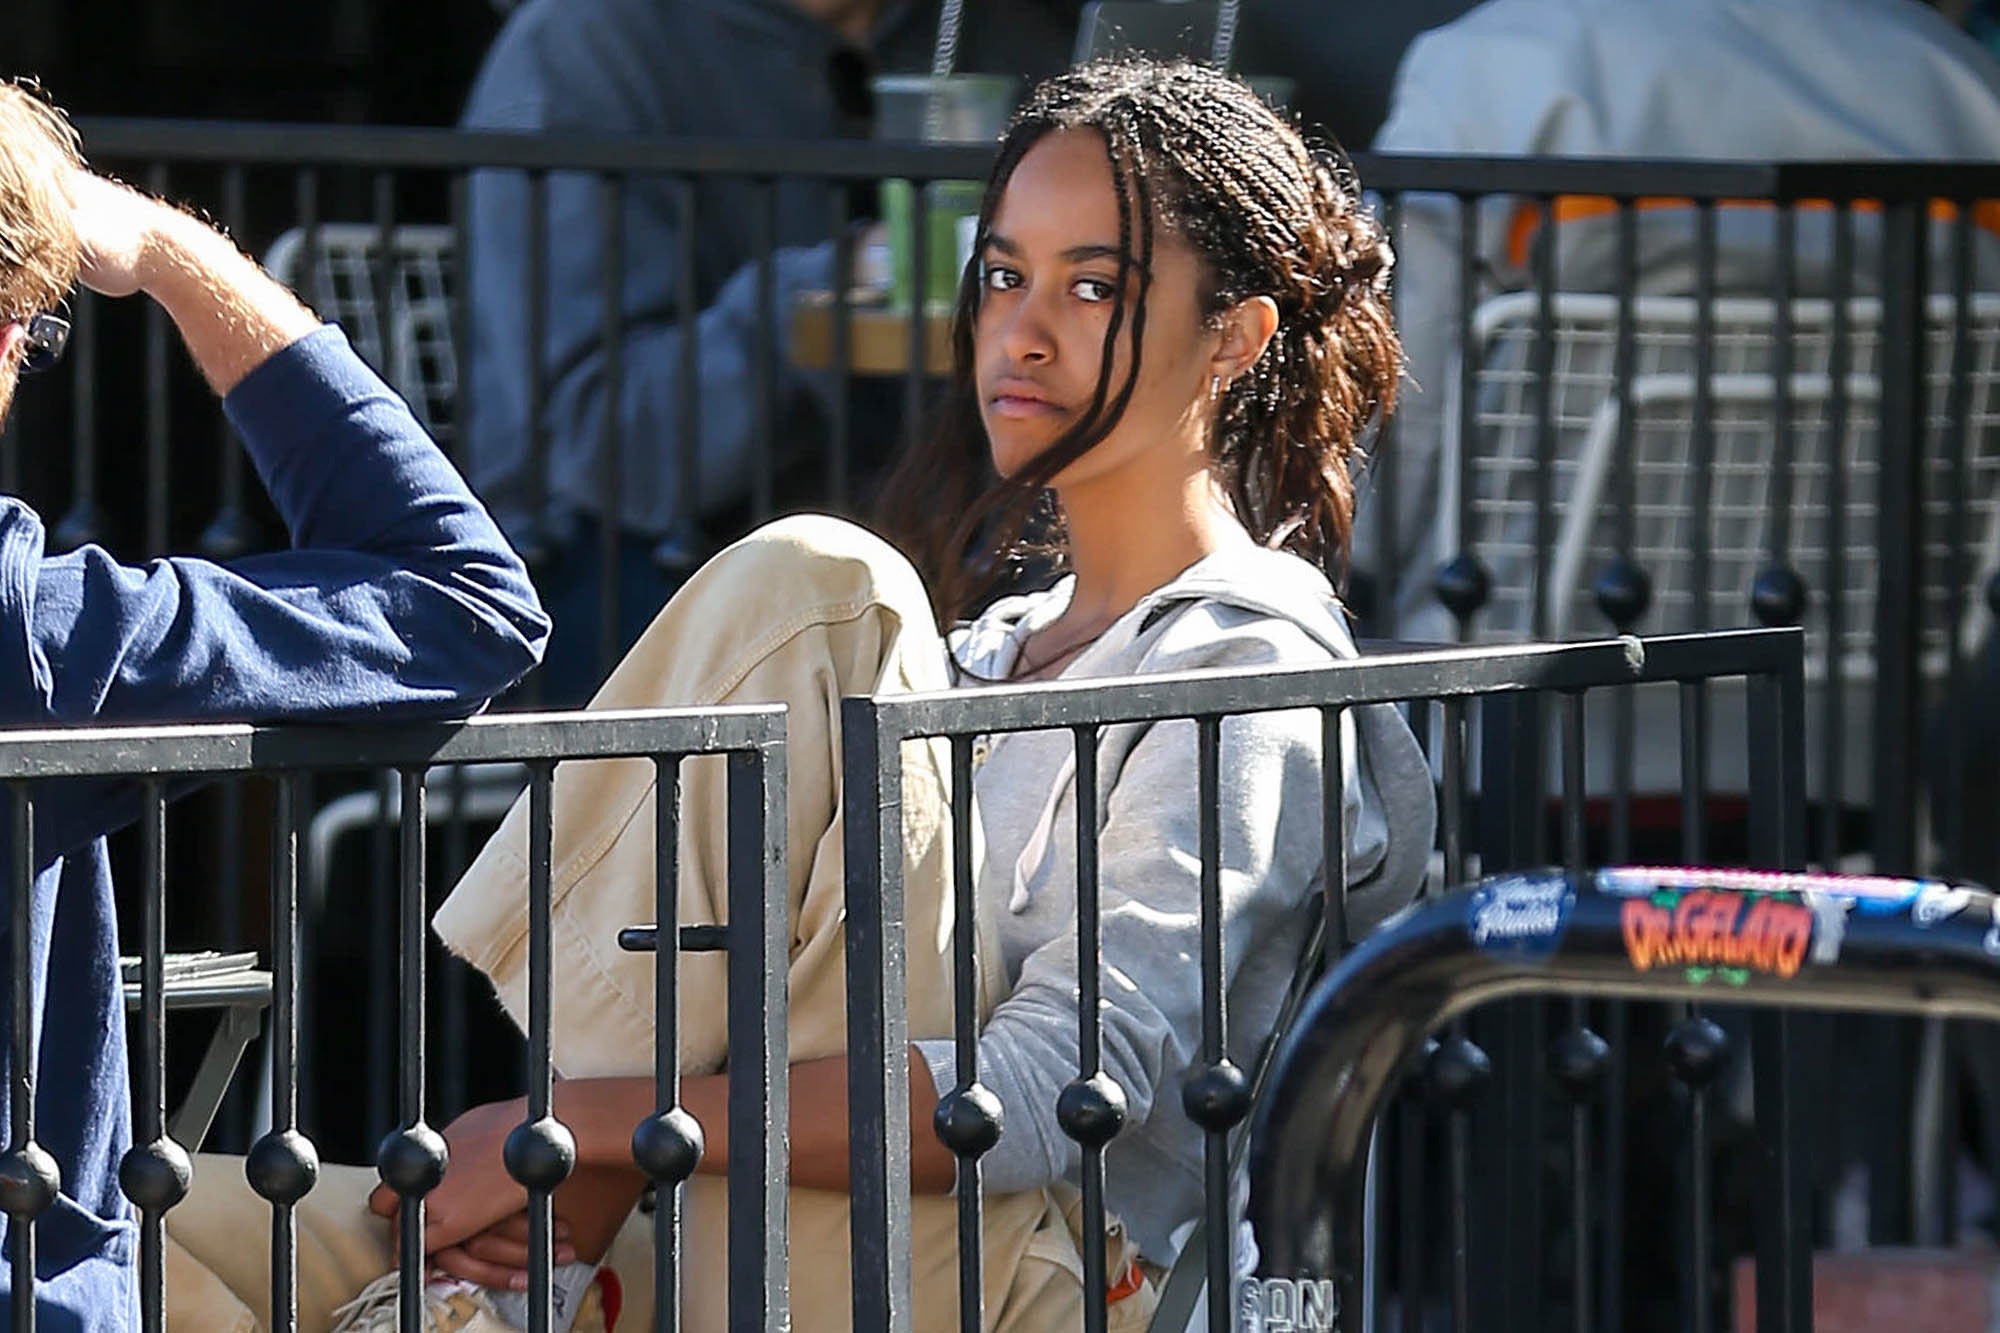 The Transformation Of Malia Obama From 6 To 25 Years Old ➤ Buzzday.info